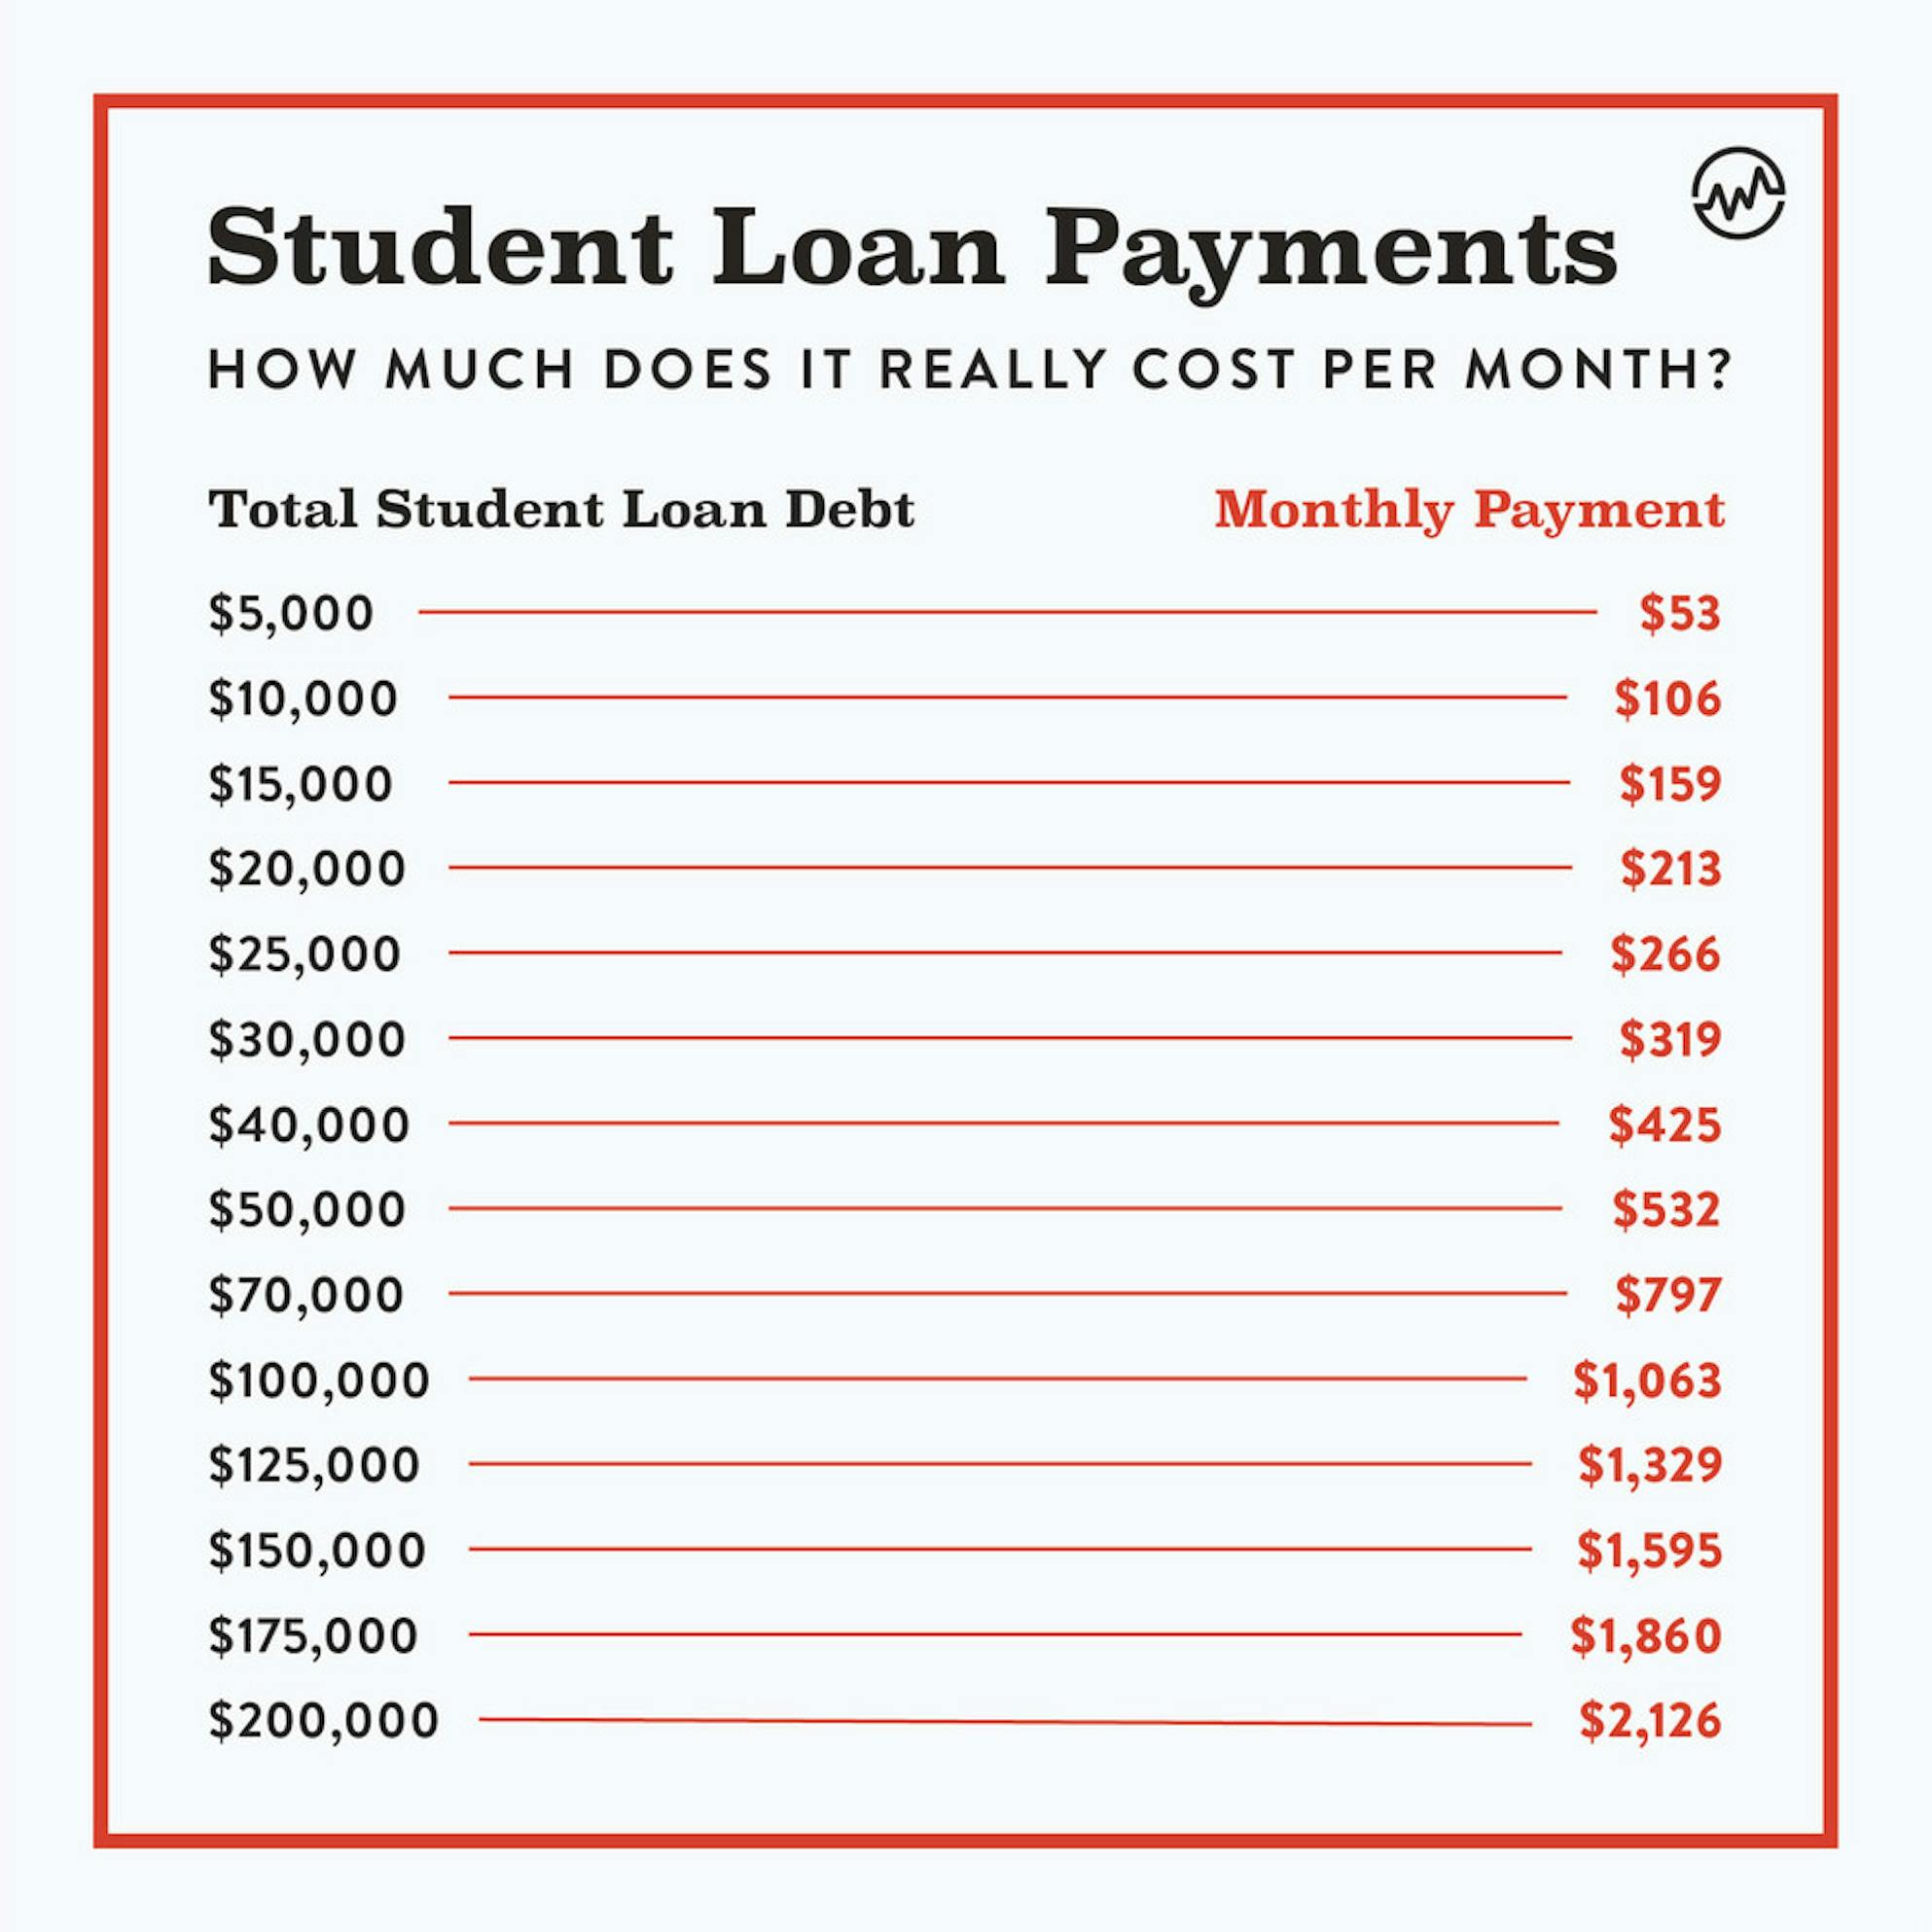 Student loan payments: how much does it really cost per month infographic